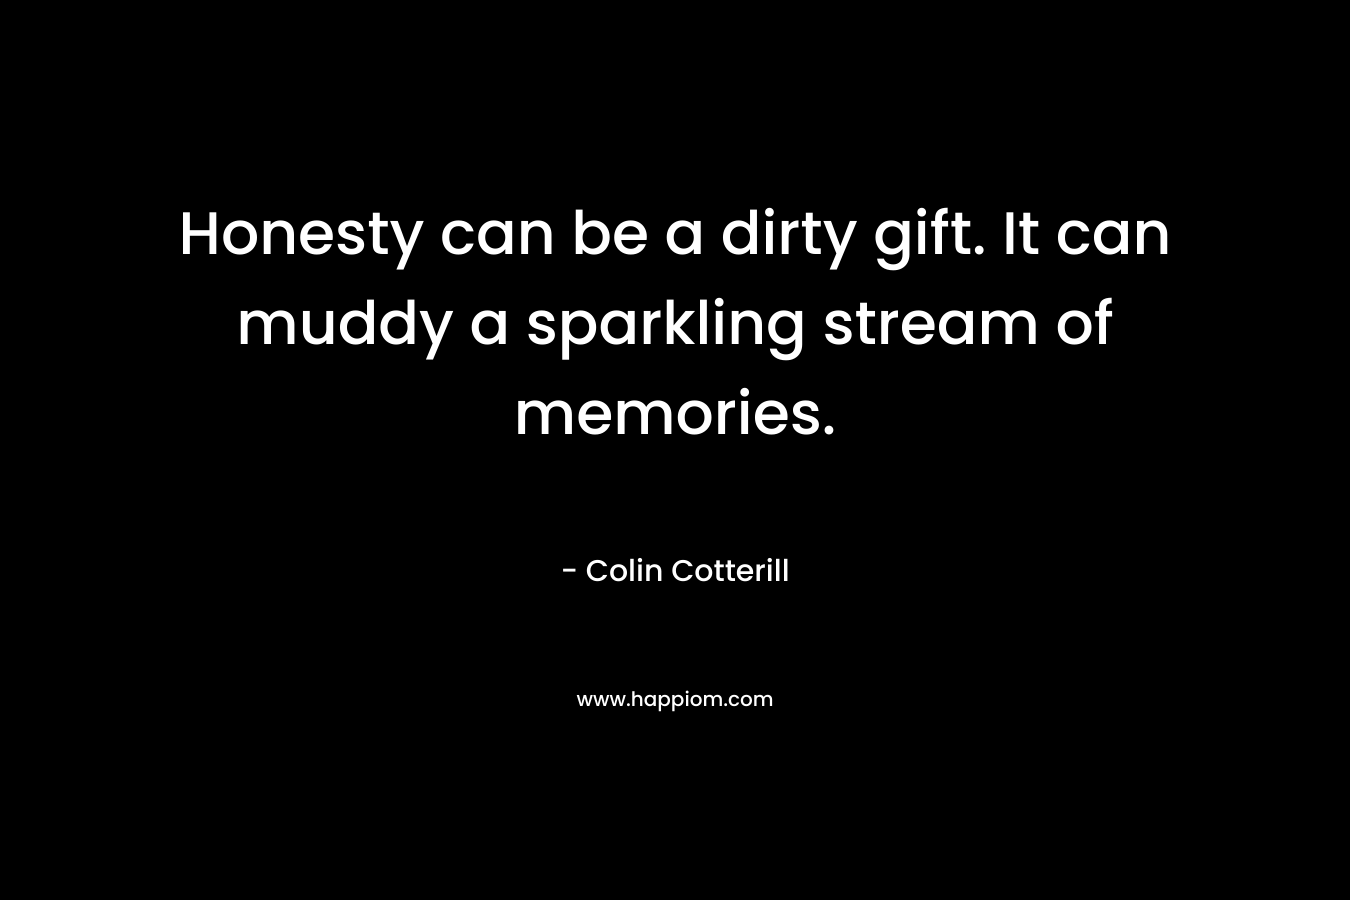 Honesty can be a dirty gift. It can muddy a sparkling stream of memories. – Colin Cotterill